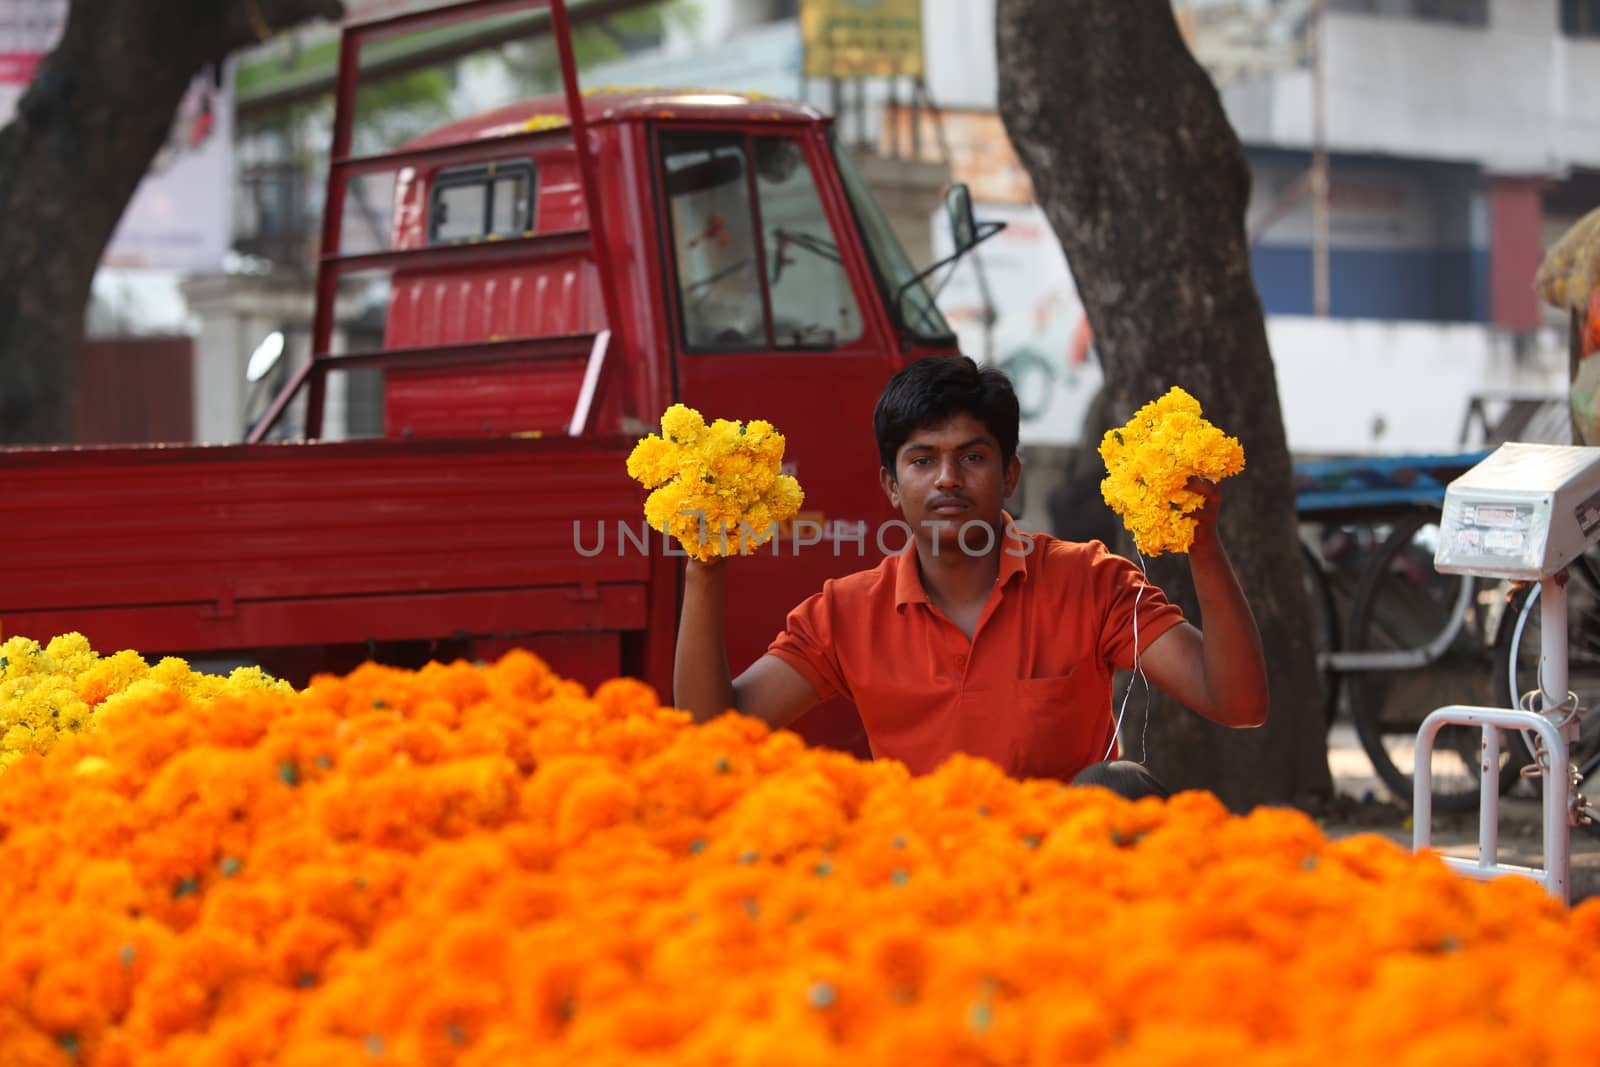 Pune, India - October 21, 2015: A man shows off his fresh marigold flowers in his streetside shop in India, on the eve of Dassera festival